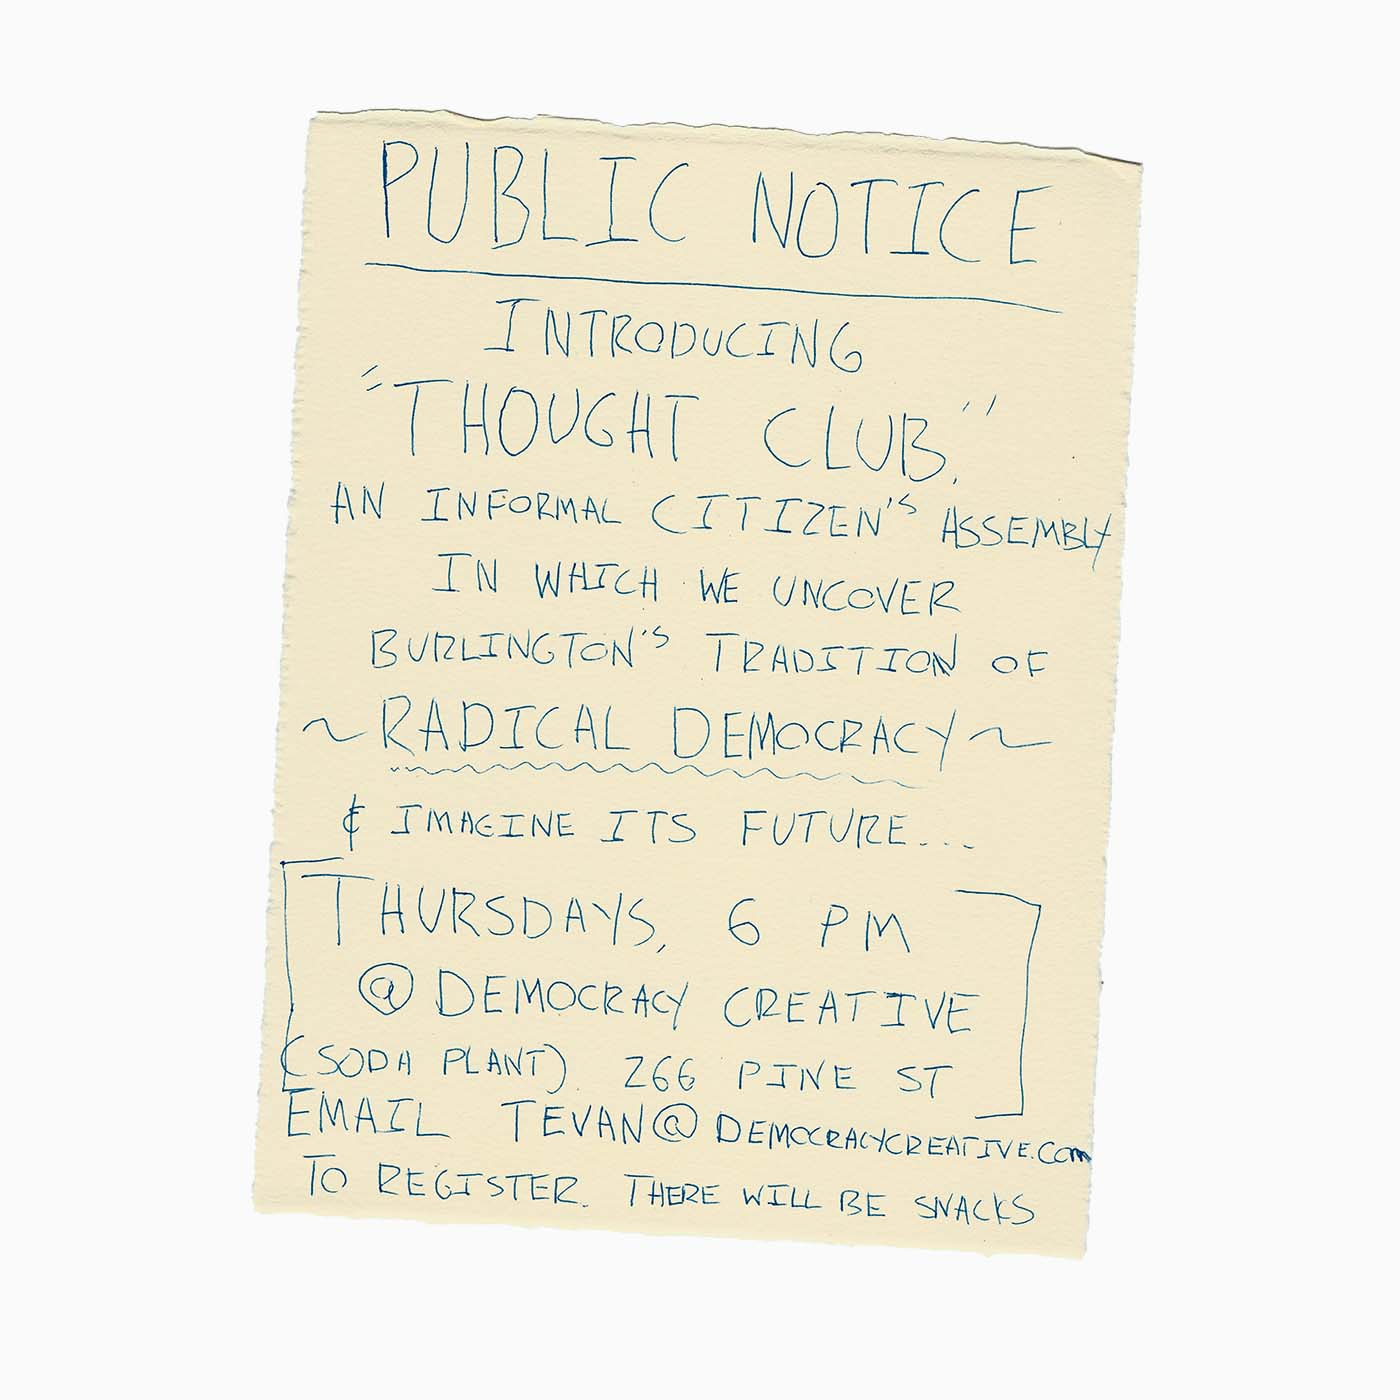 Paper with writing: "Public Notice: Introducing Thought Club, an informal citizens assembly in which we uncover Burlington's tradition of Radical Democracy and imagine its future"